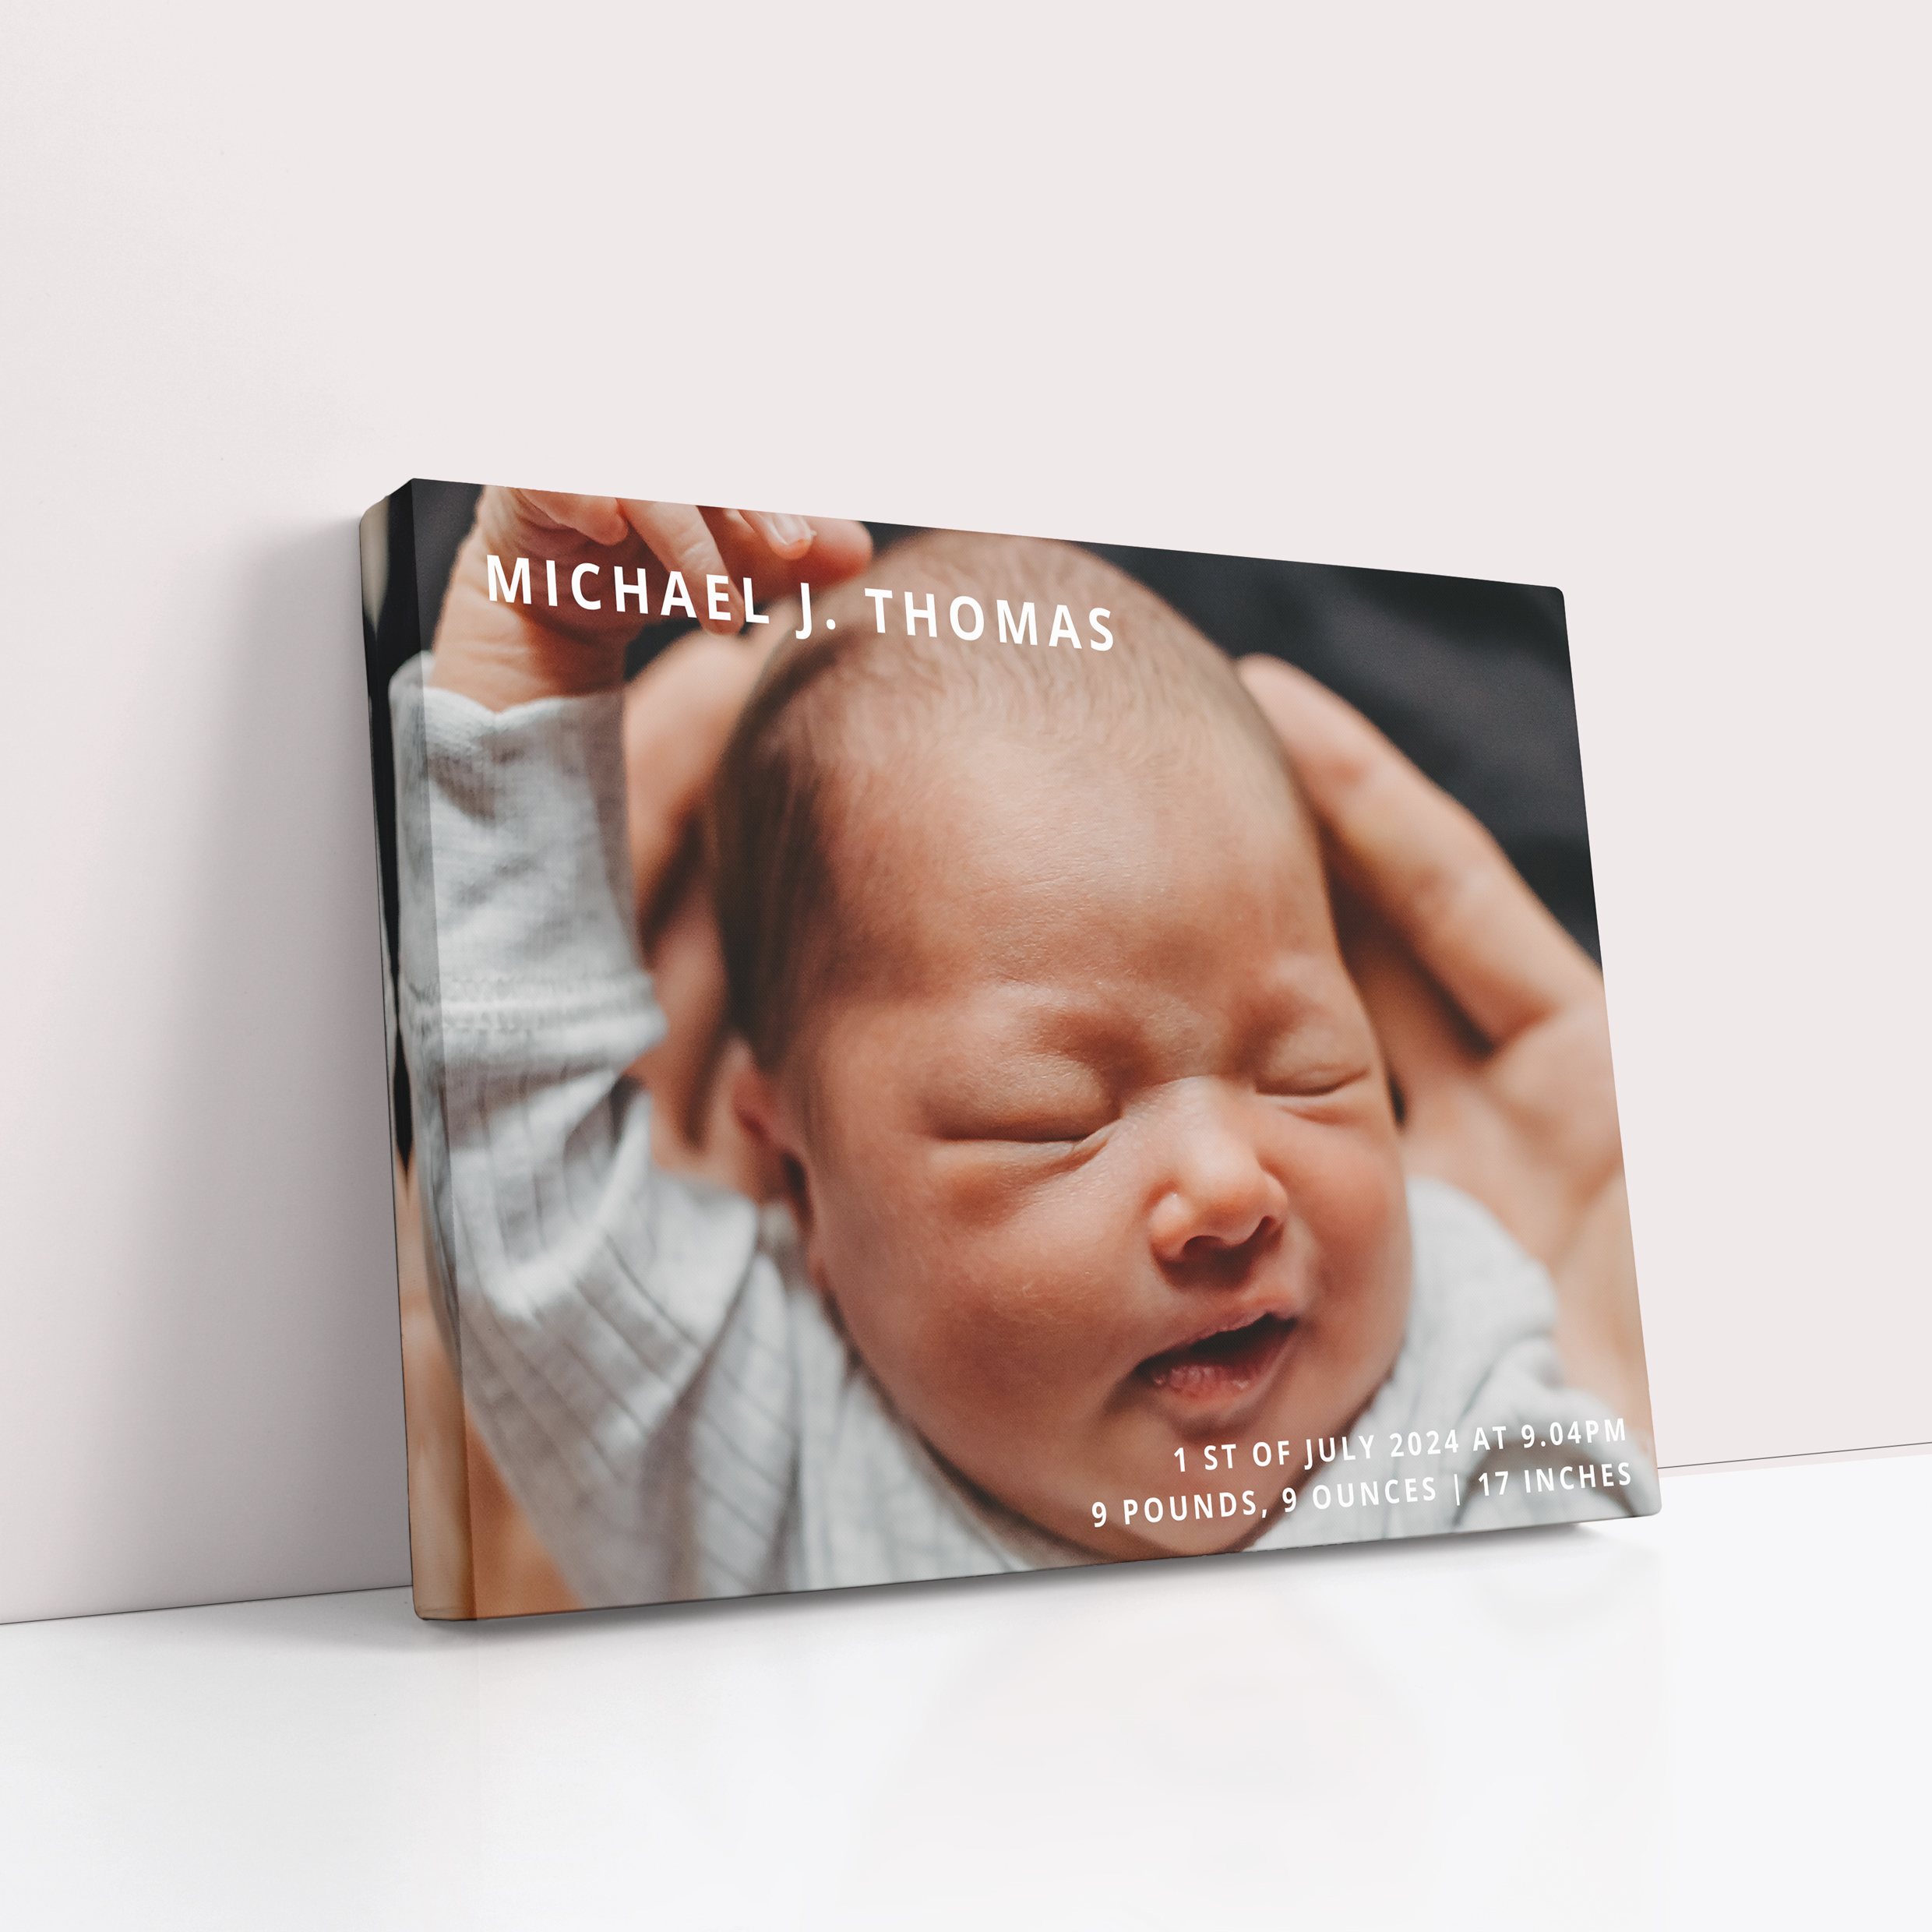 Child's Portrait Personalised Stretch Canvas Print - Capture childhood innocence with one cherished photo